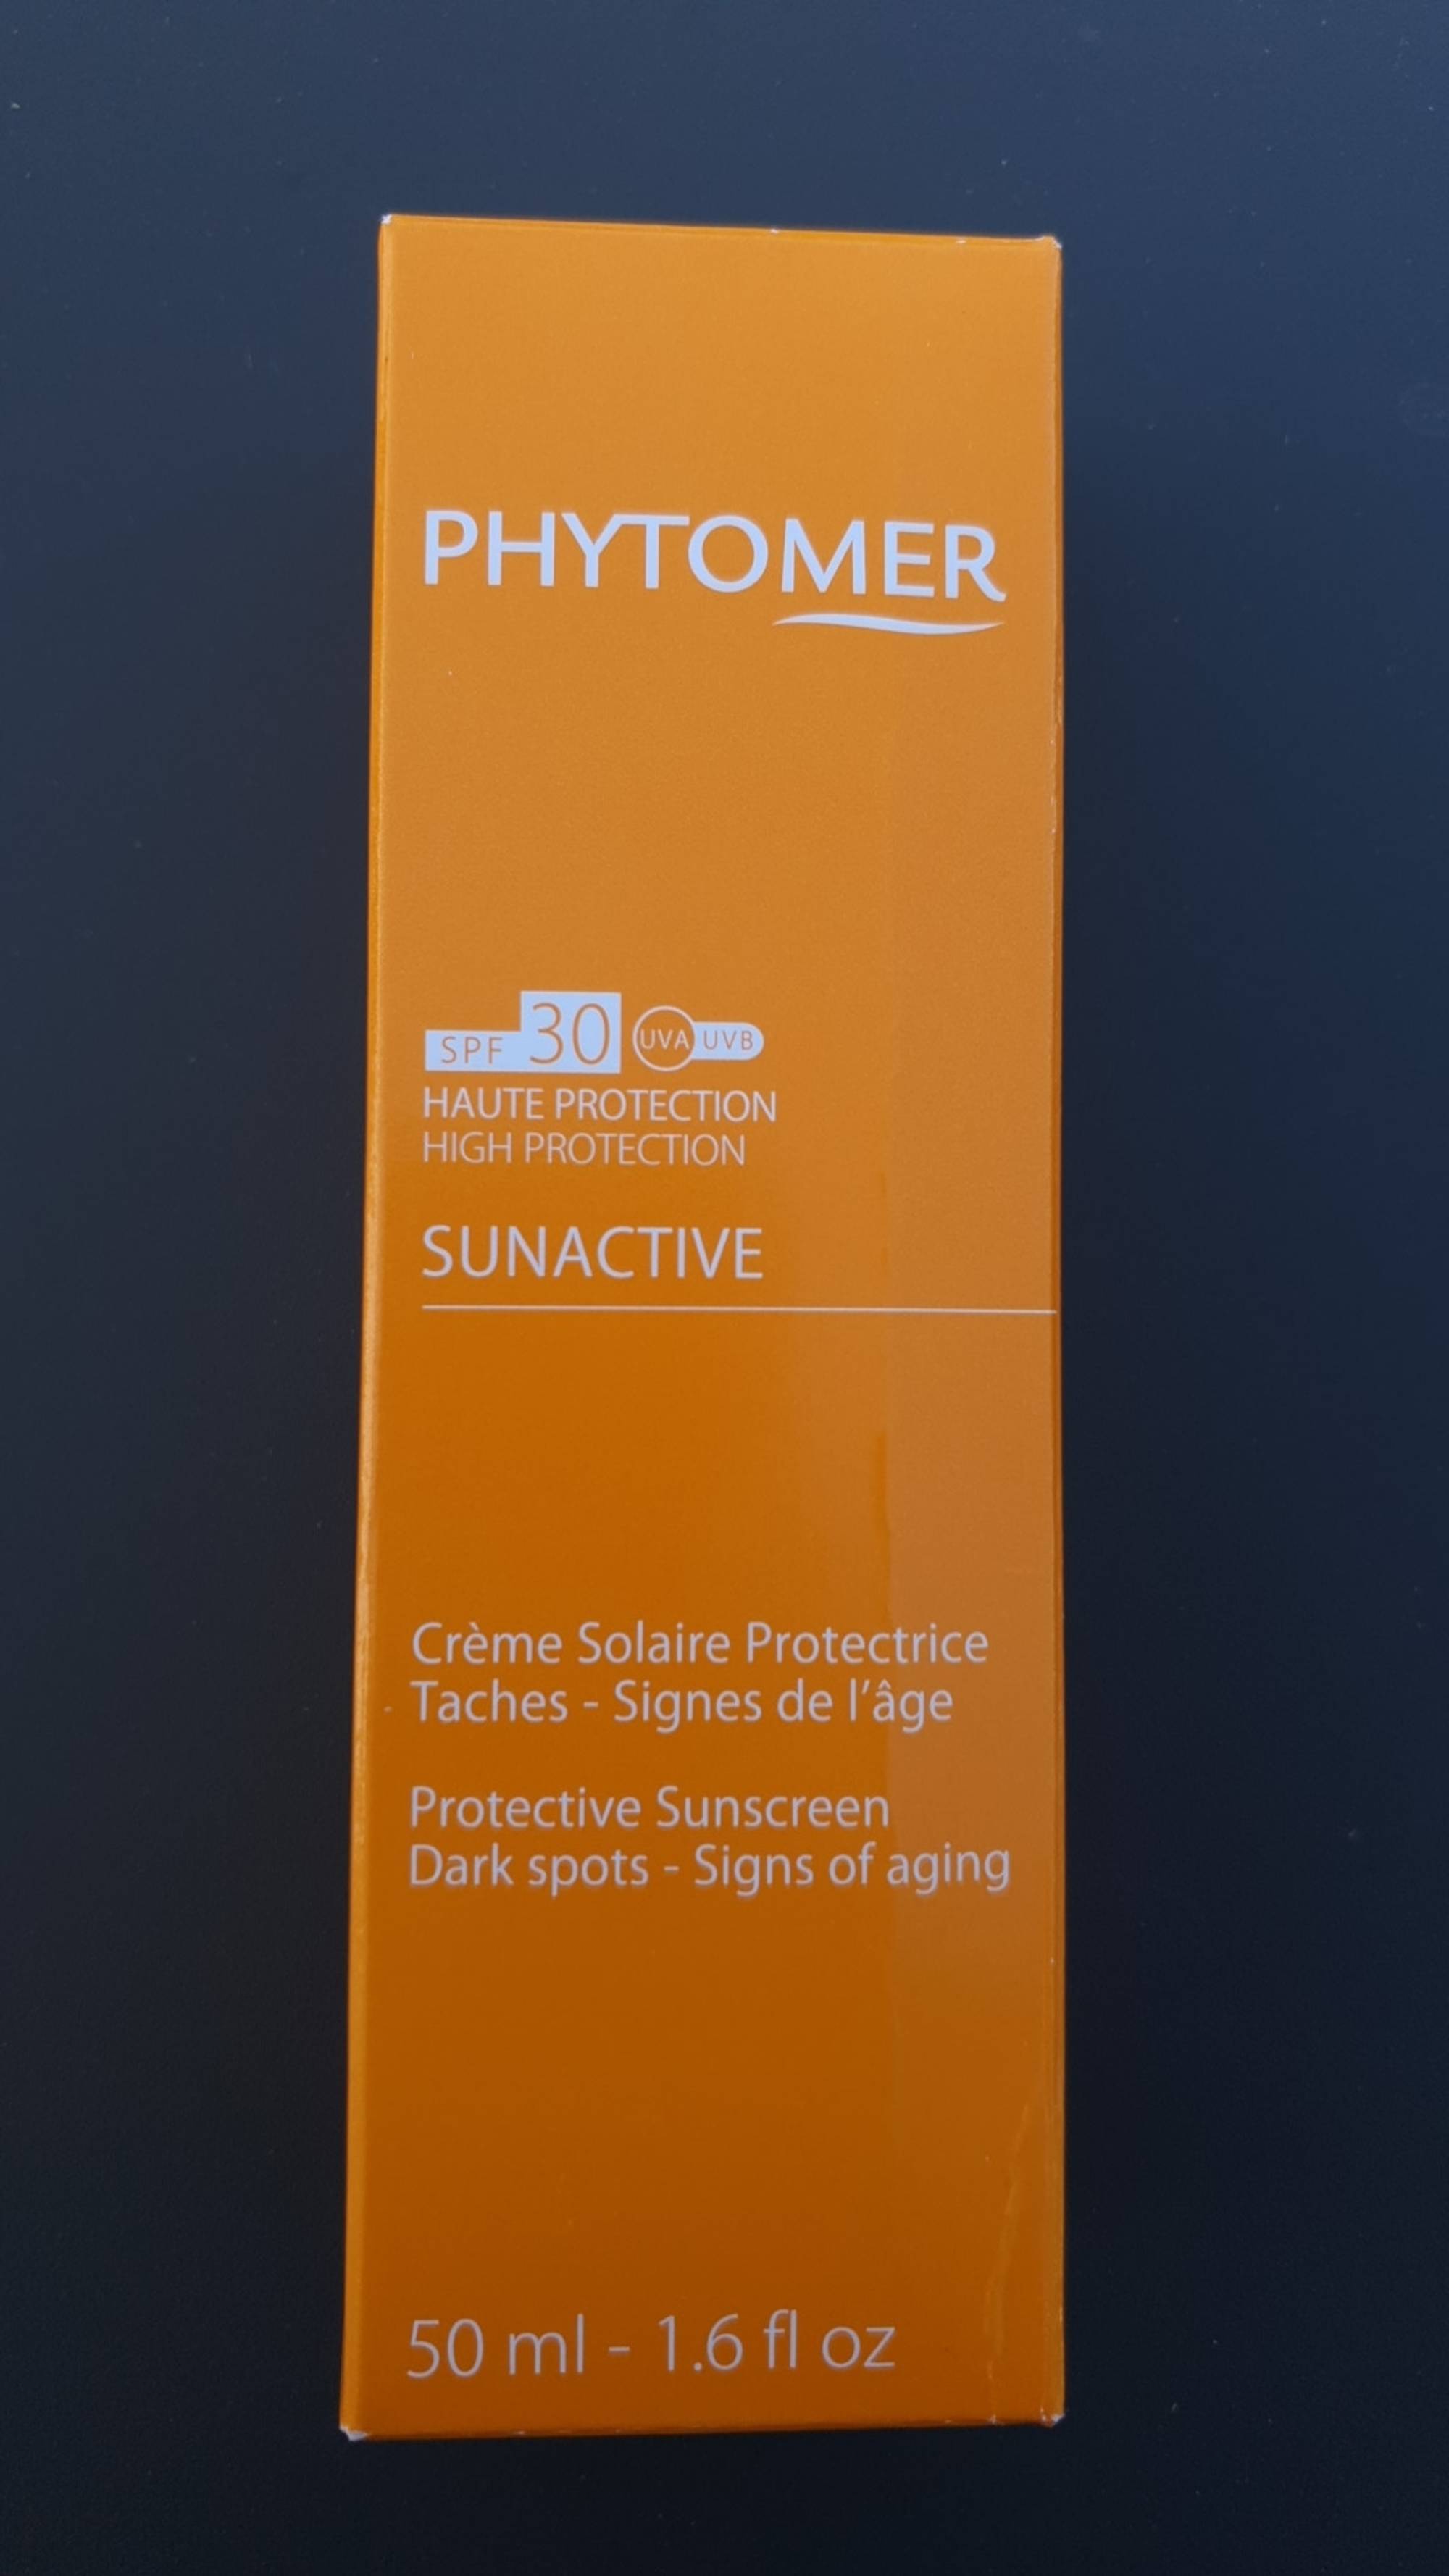 PHYTOMER - Sunactive - Crème solaire protectrice SPF 30